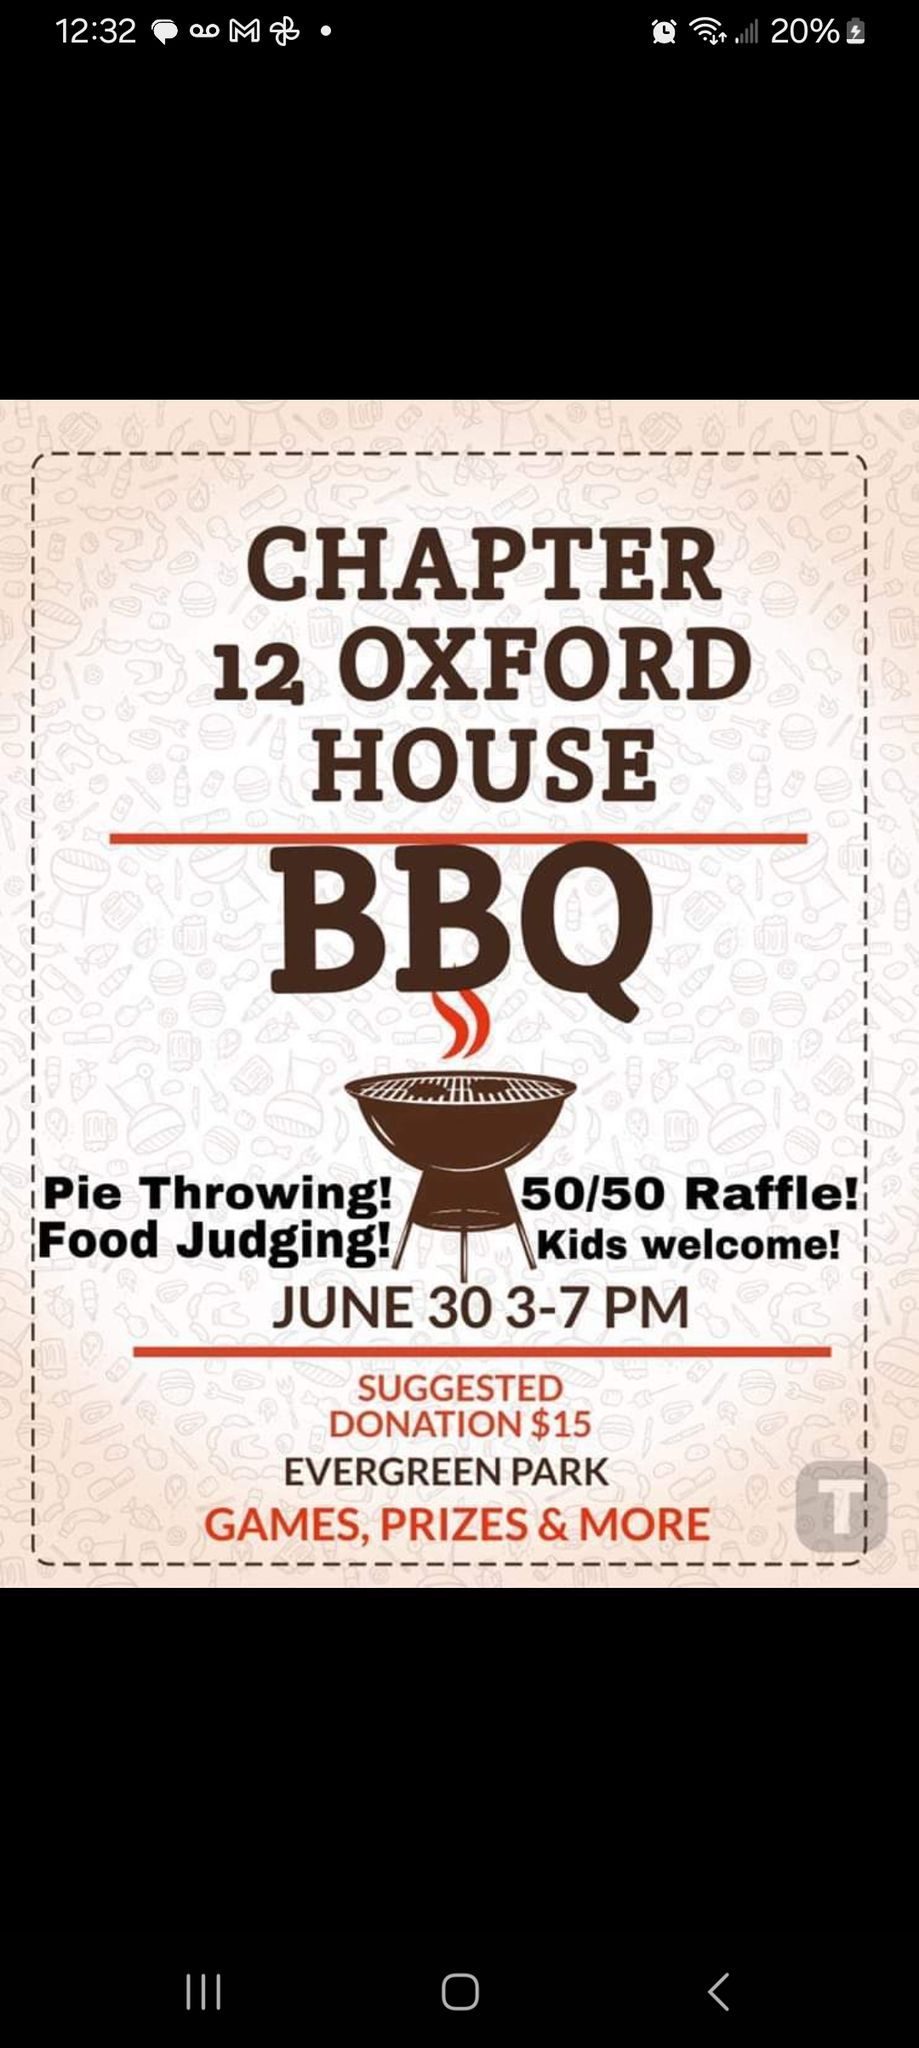 Oxford house Chapter 12 BBQ 